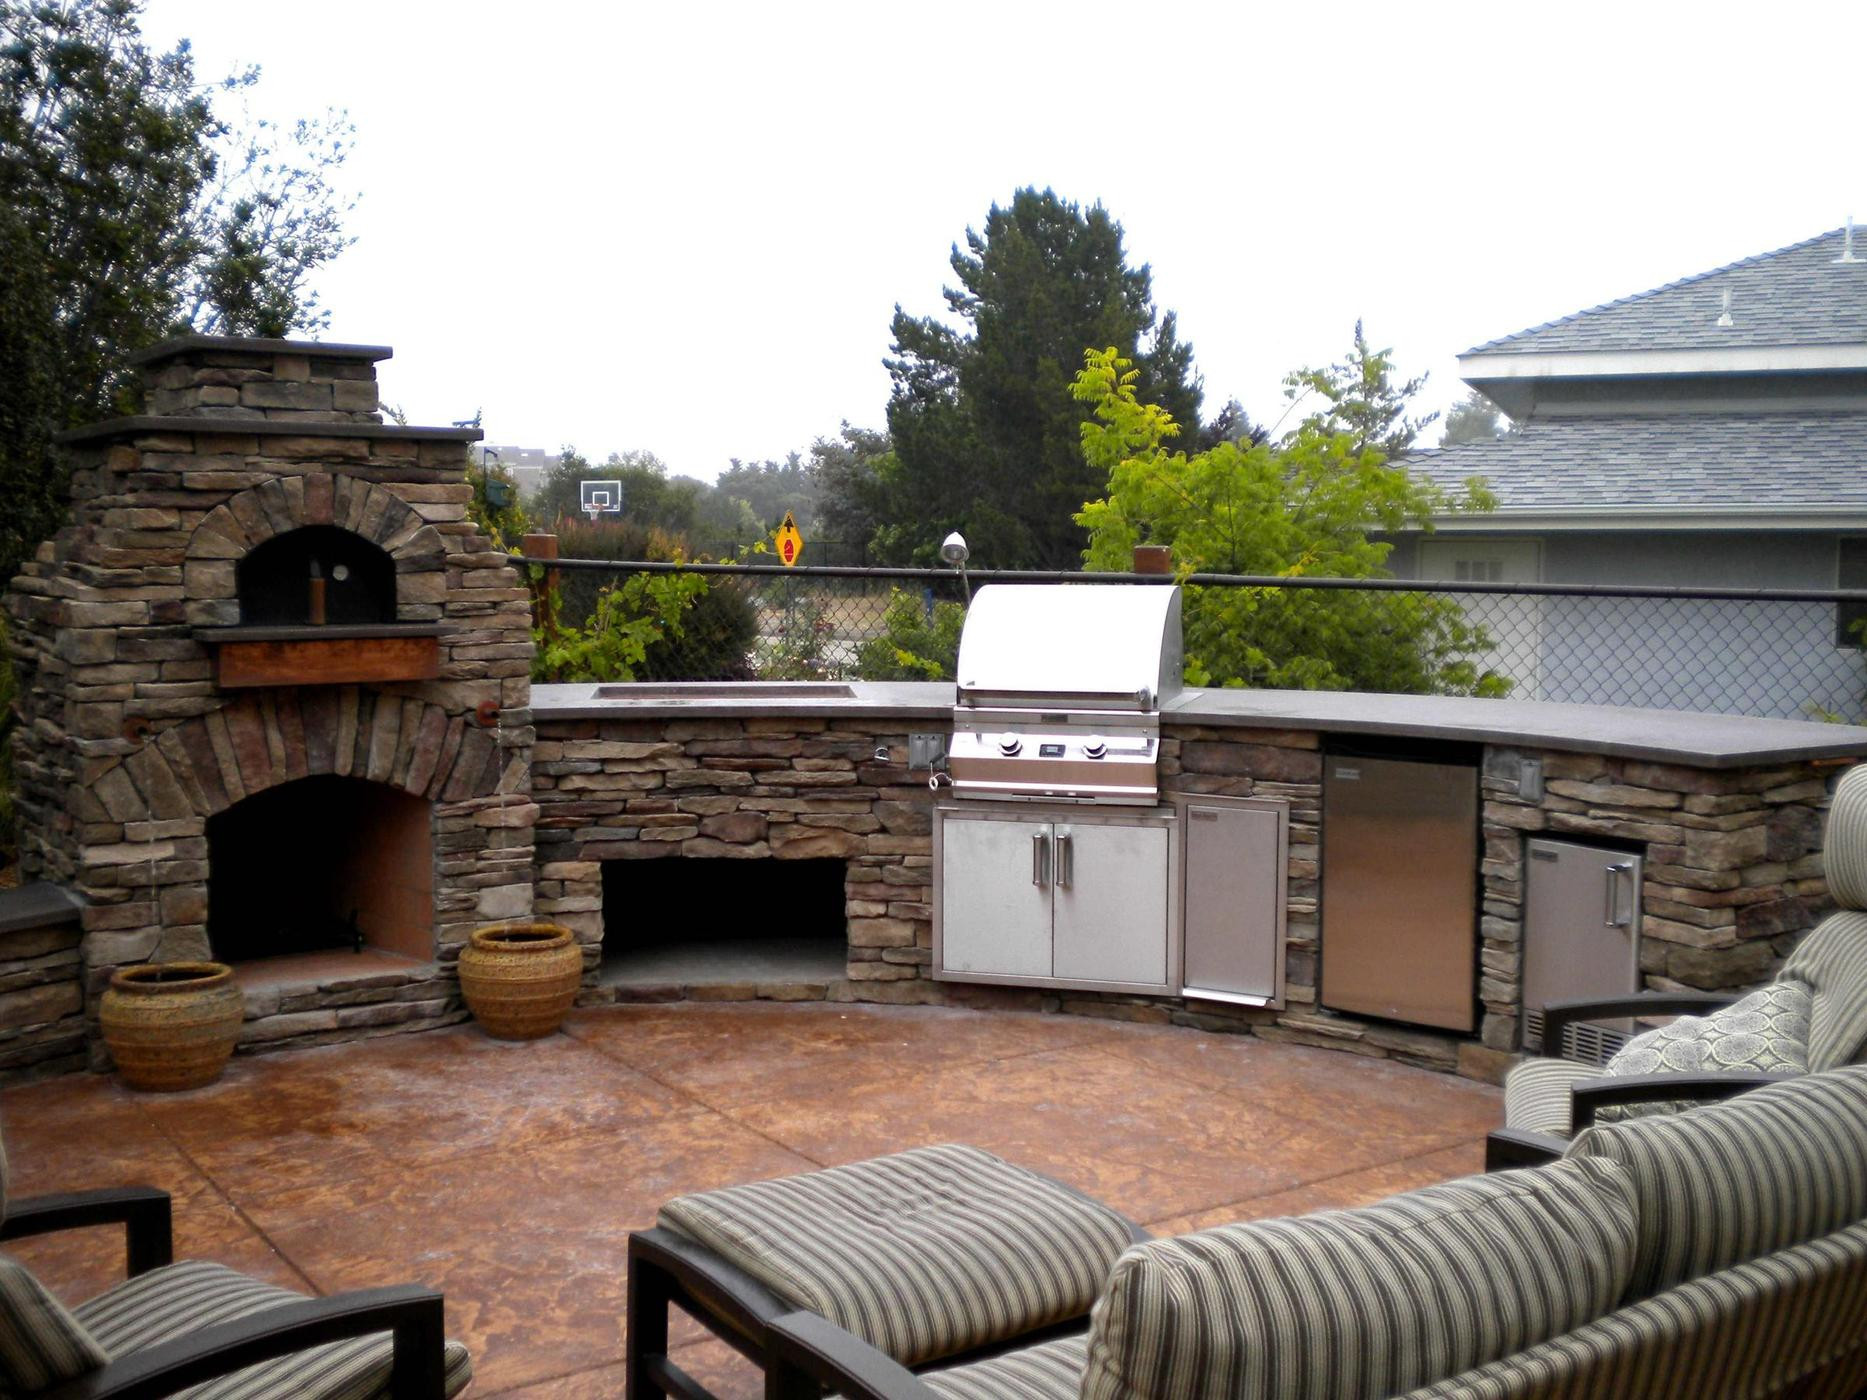 Outdoor Kitchen With Pizza Oven
 Help customers pondering outdoor kitchens stand out